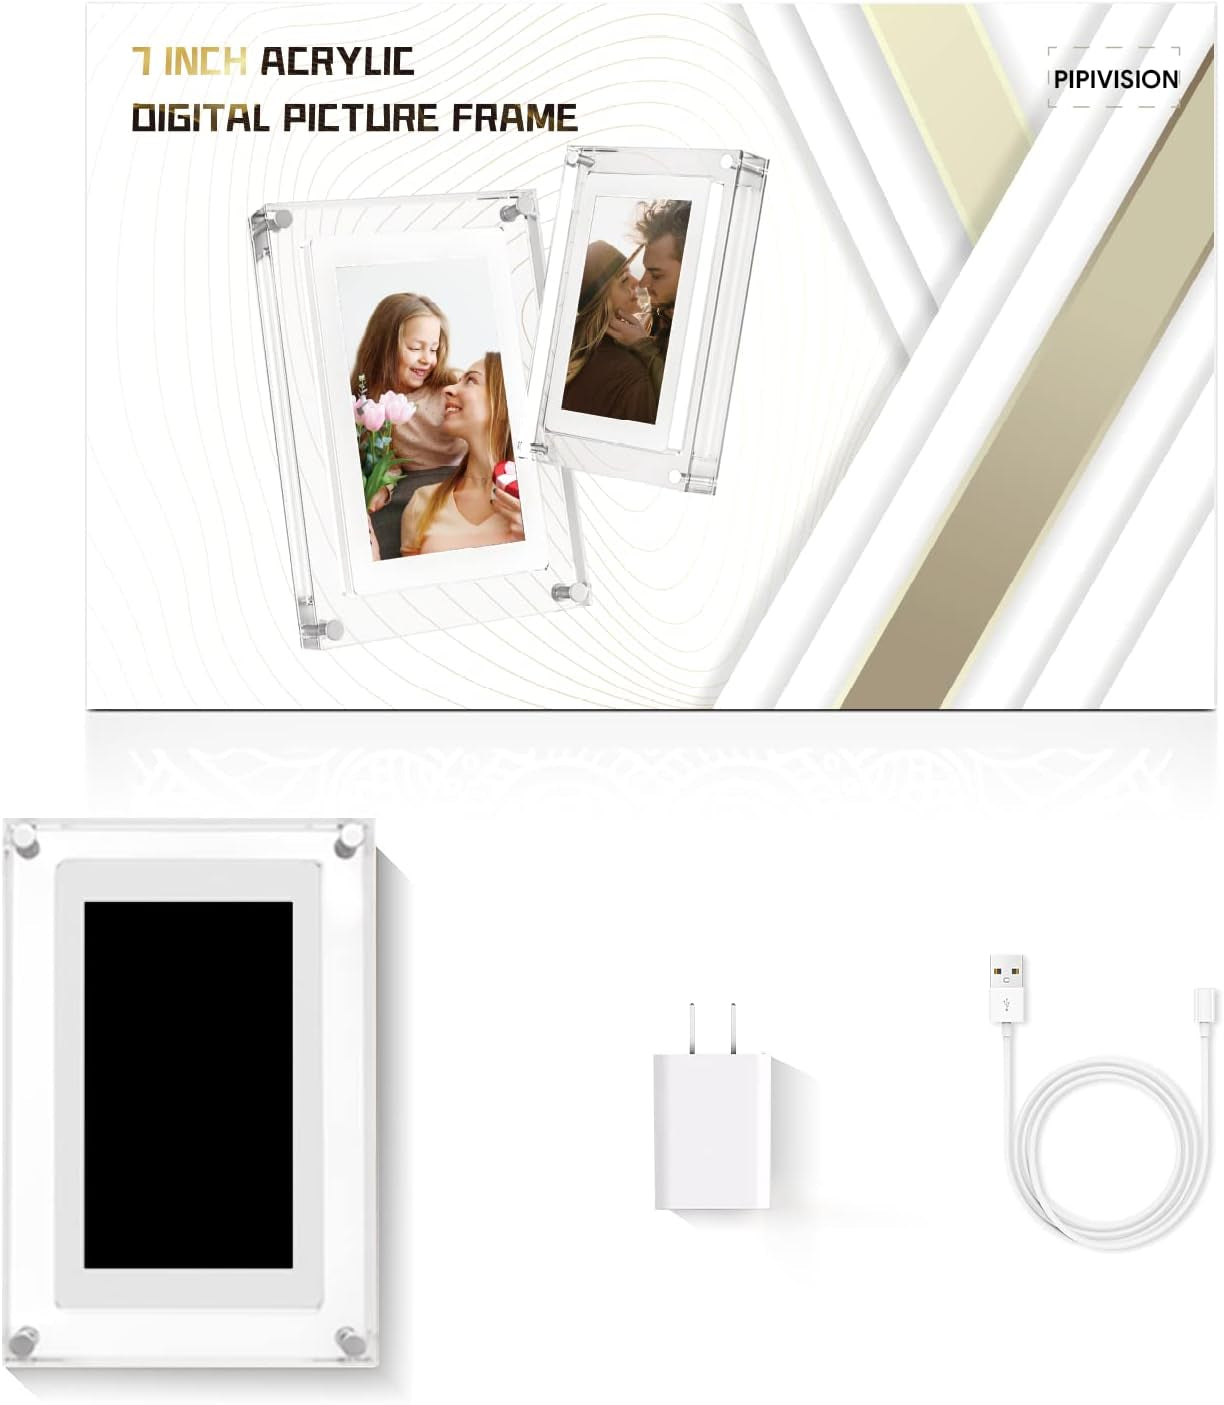 Enhance Your Memories with our 7 Inch Acrylic Digital Picture Frame - Store, Display, and Share Your Precious Moments!